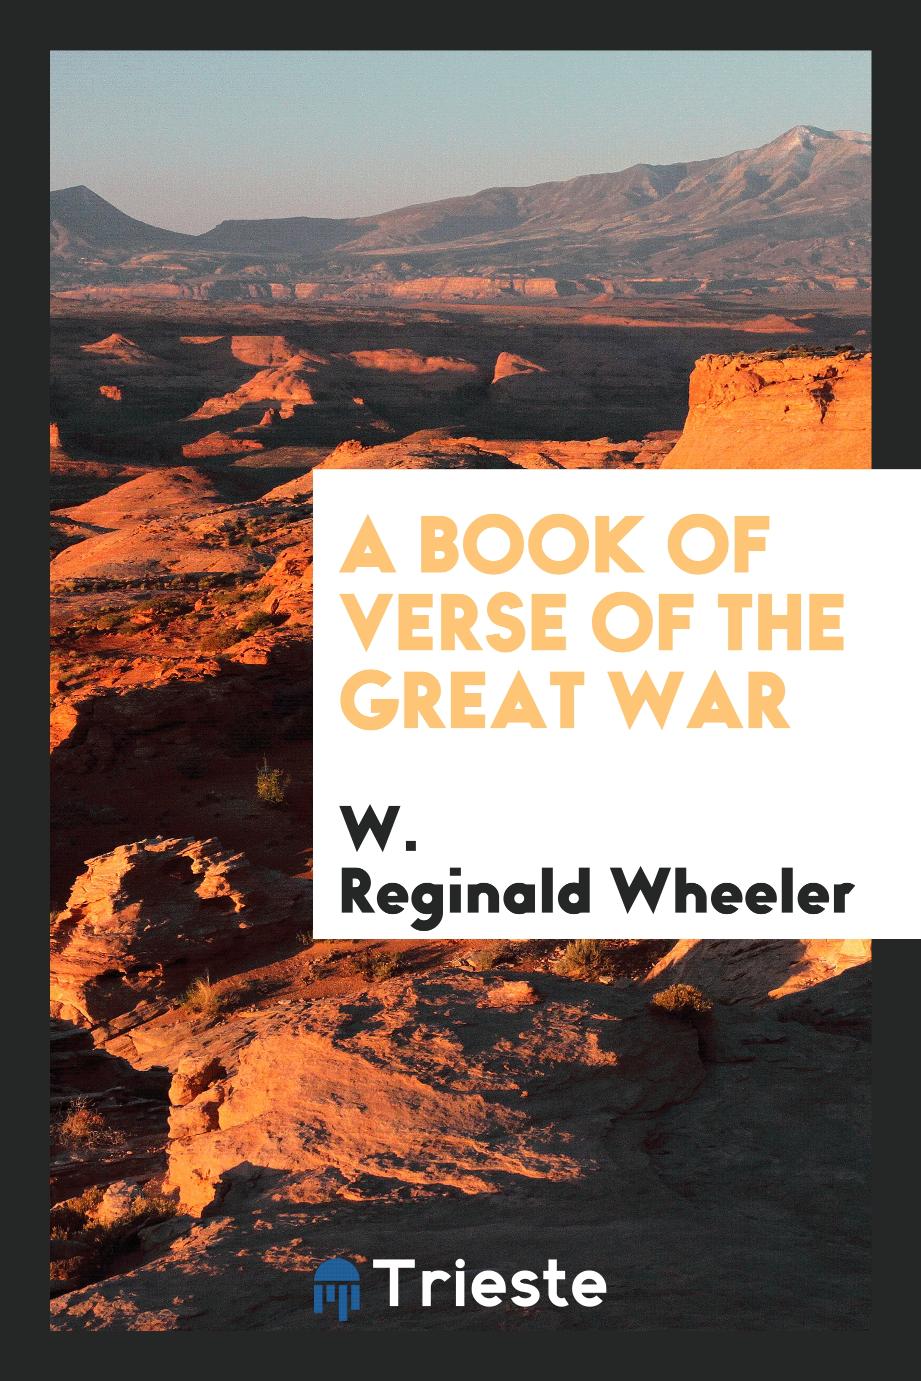 A book of verse of the great war